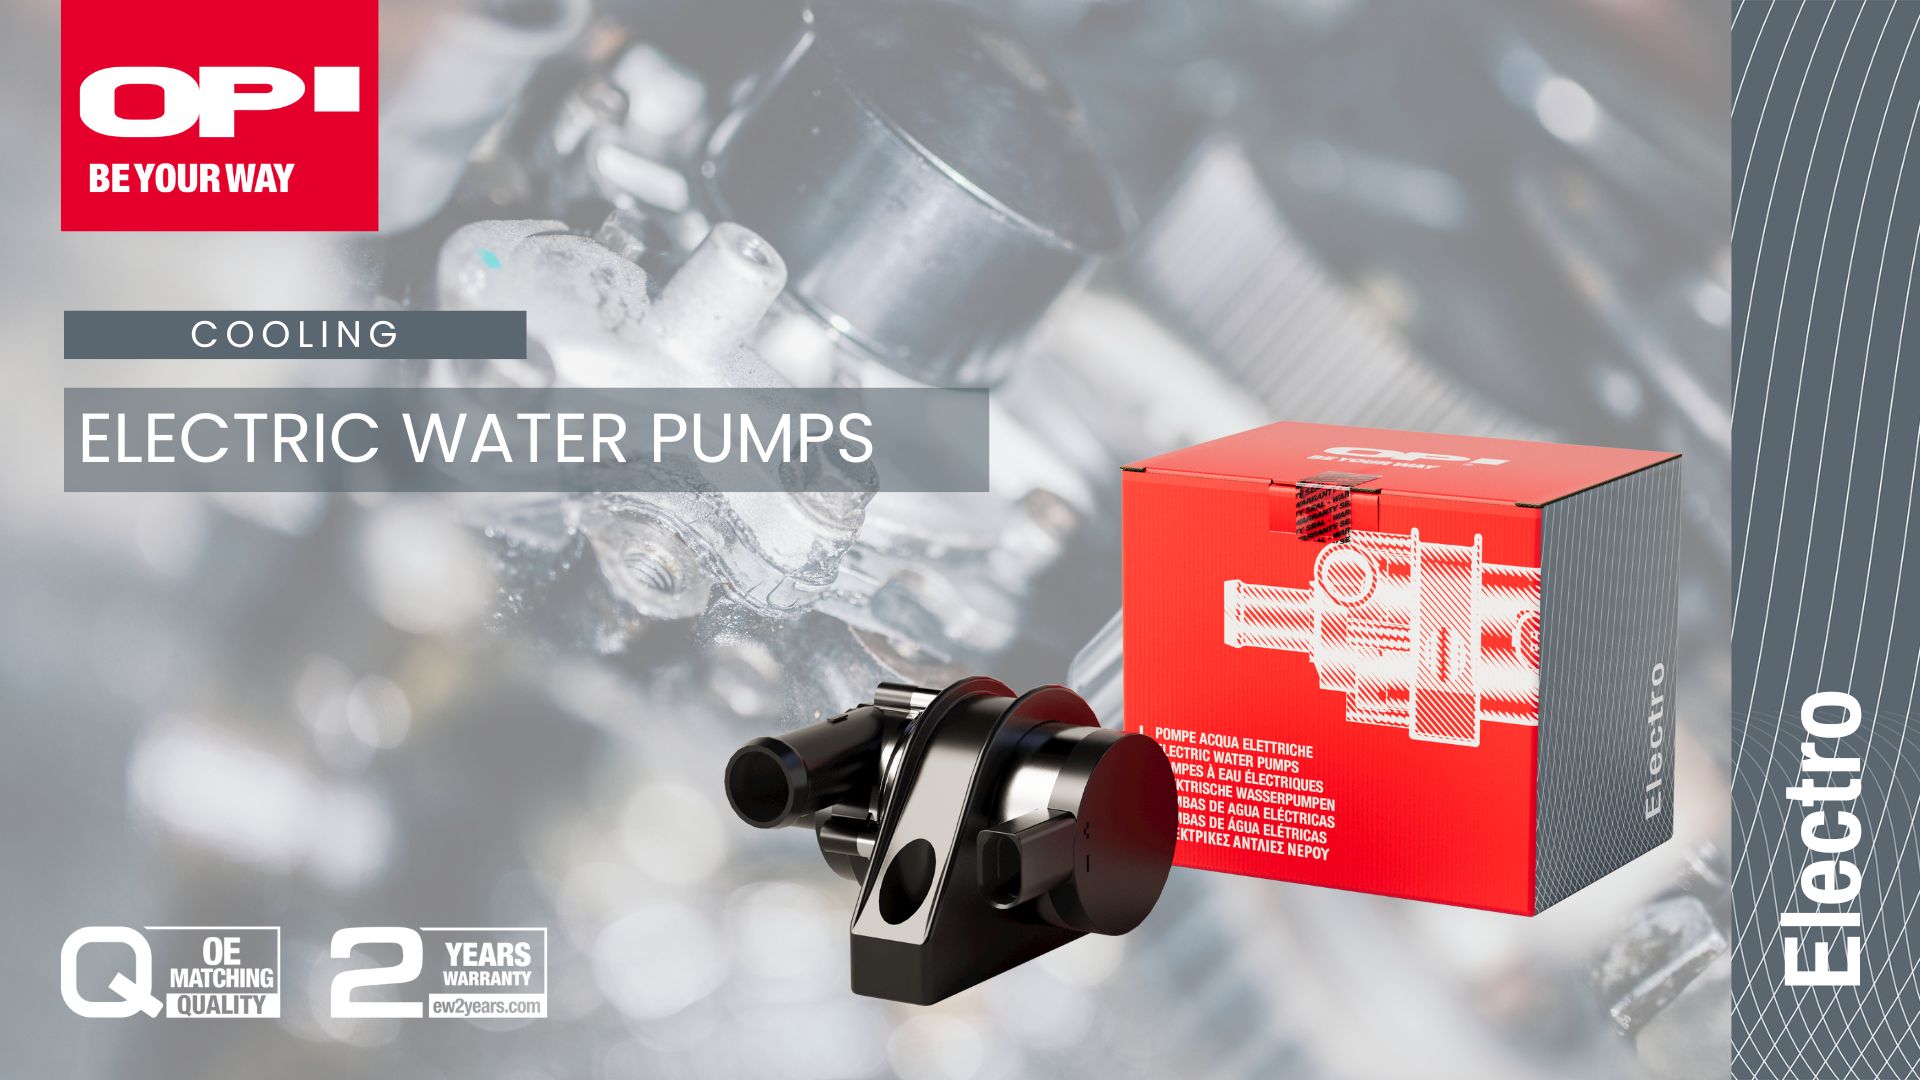 NEW IN RANGE: Electric Water Pumps